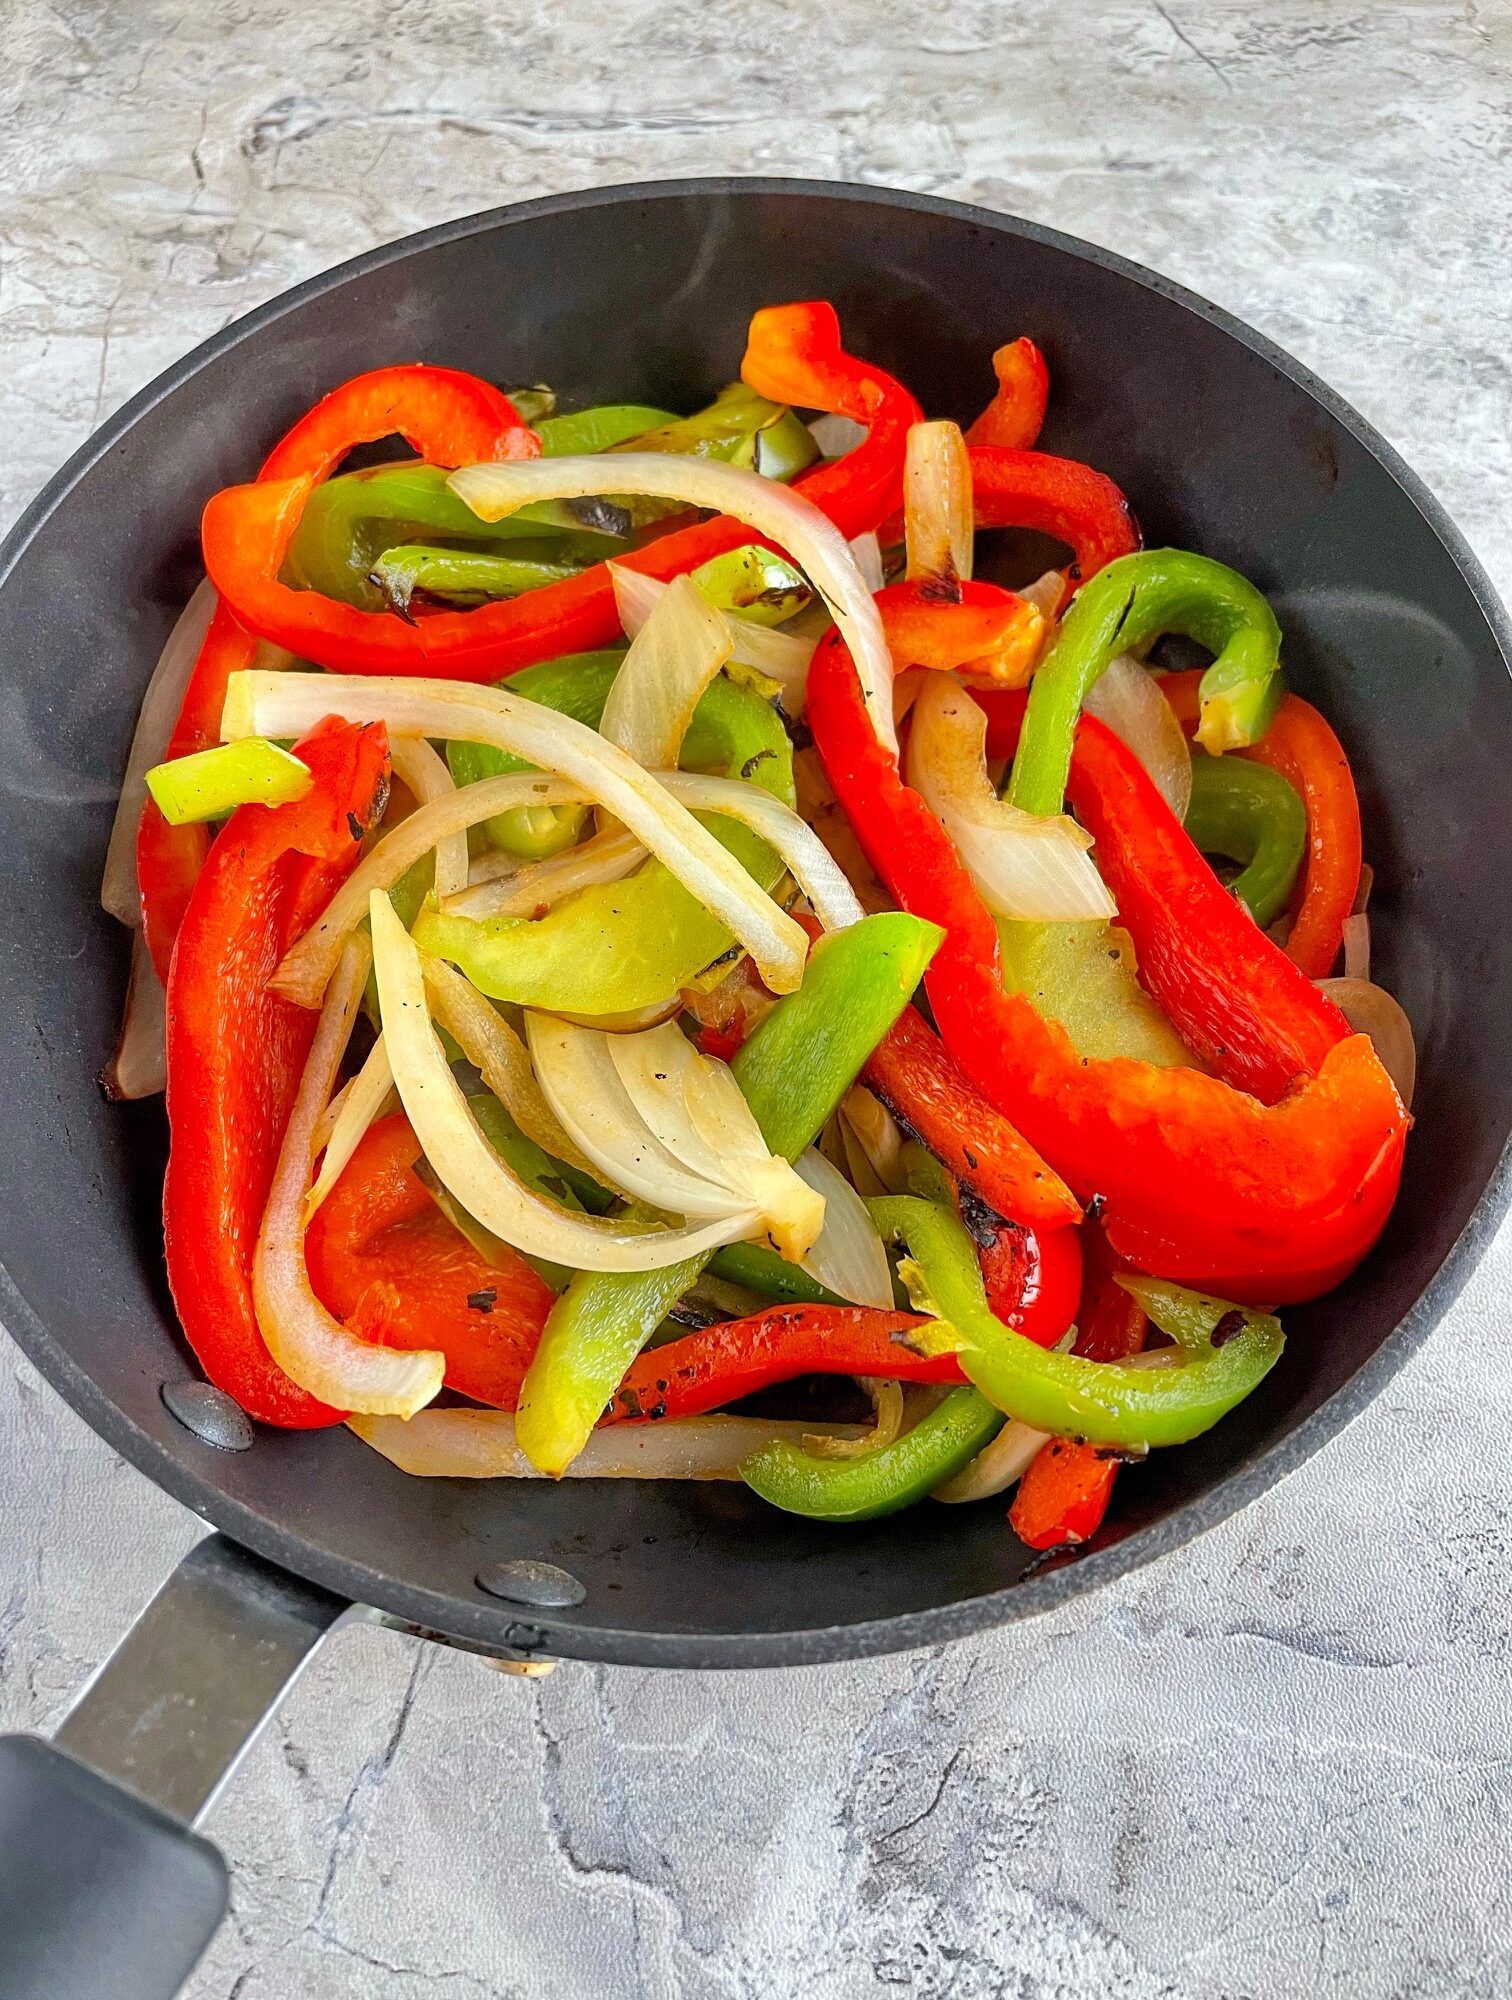 sauteed peppers and onions in the frying pan